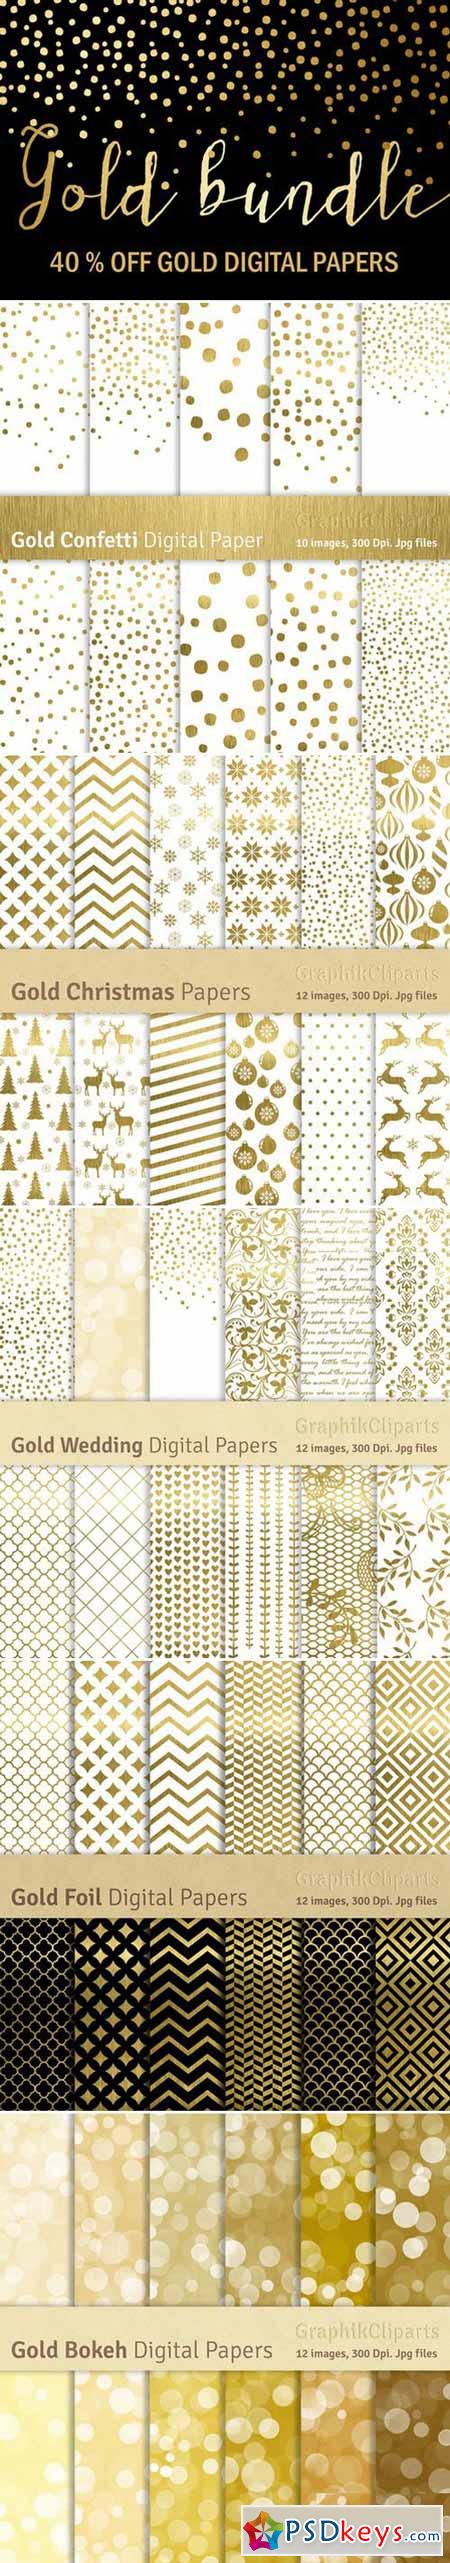 Gold Bundle Gold Papers 449384